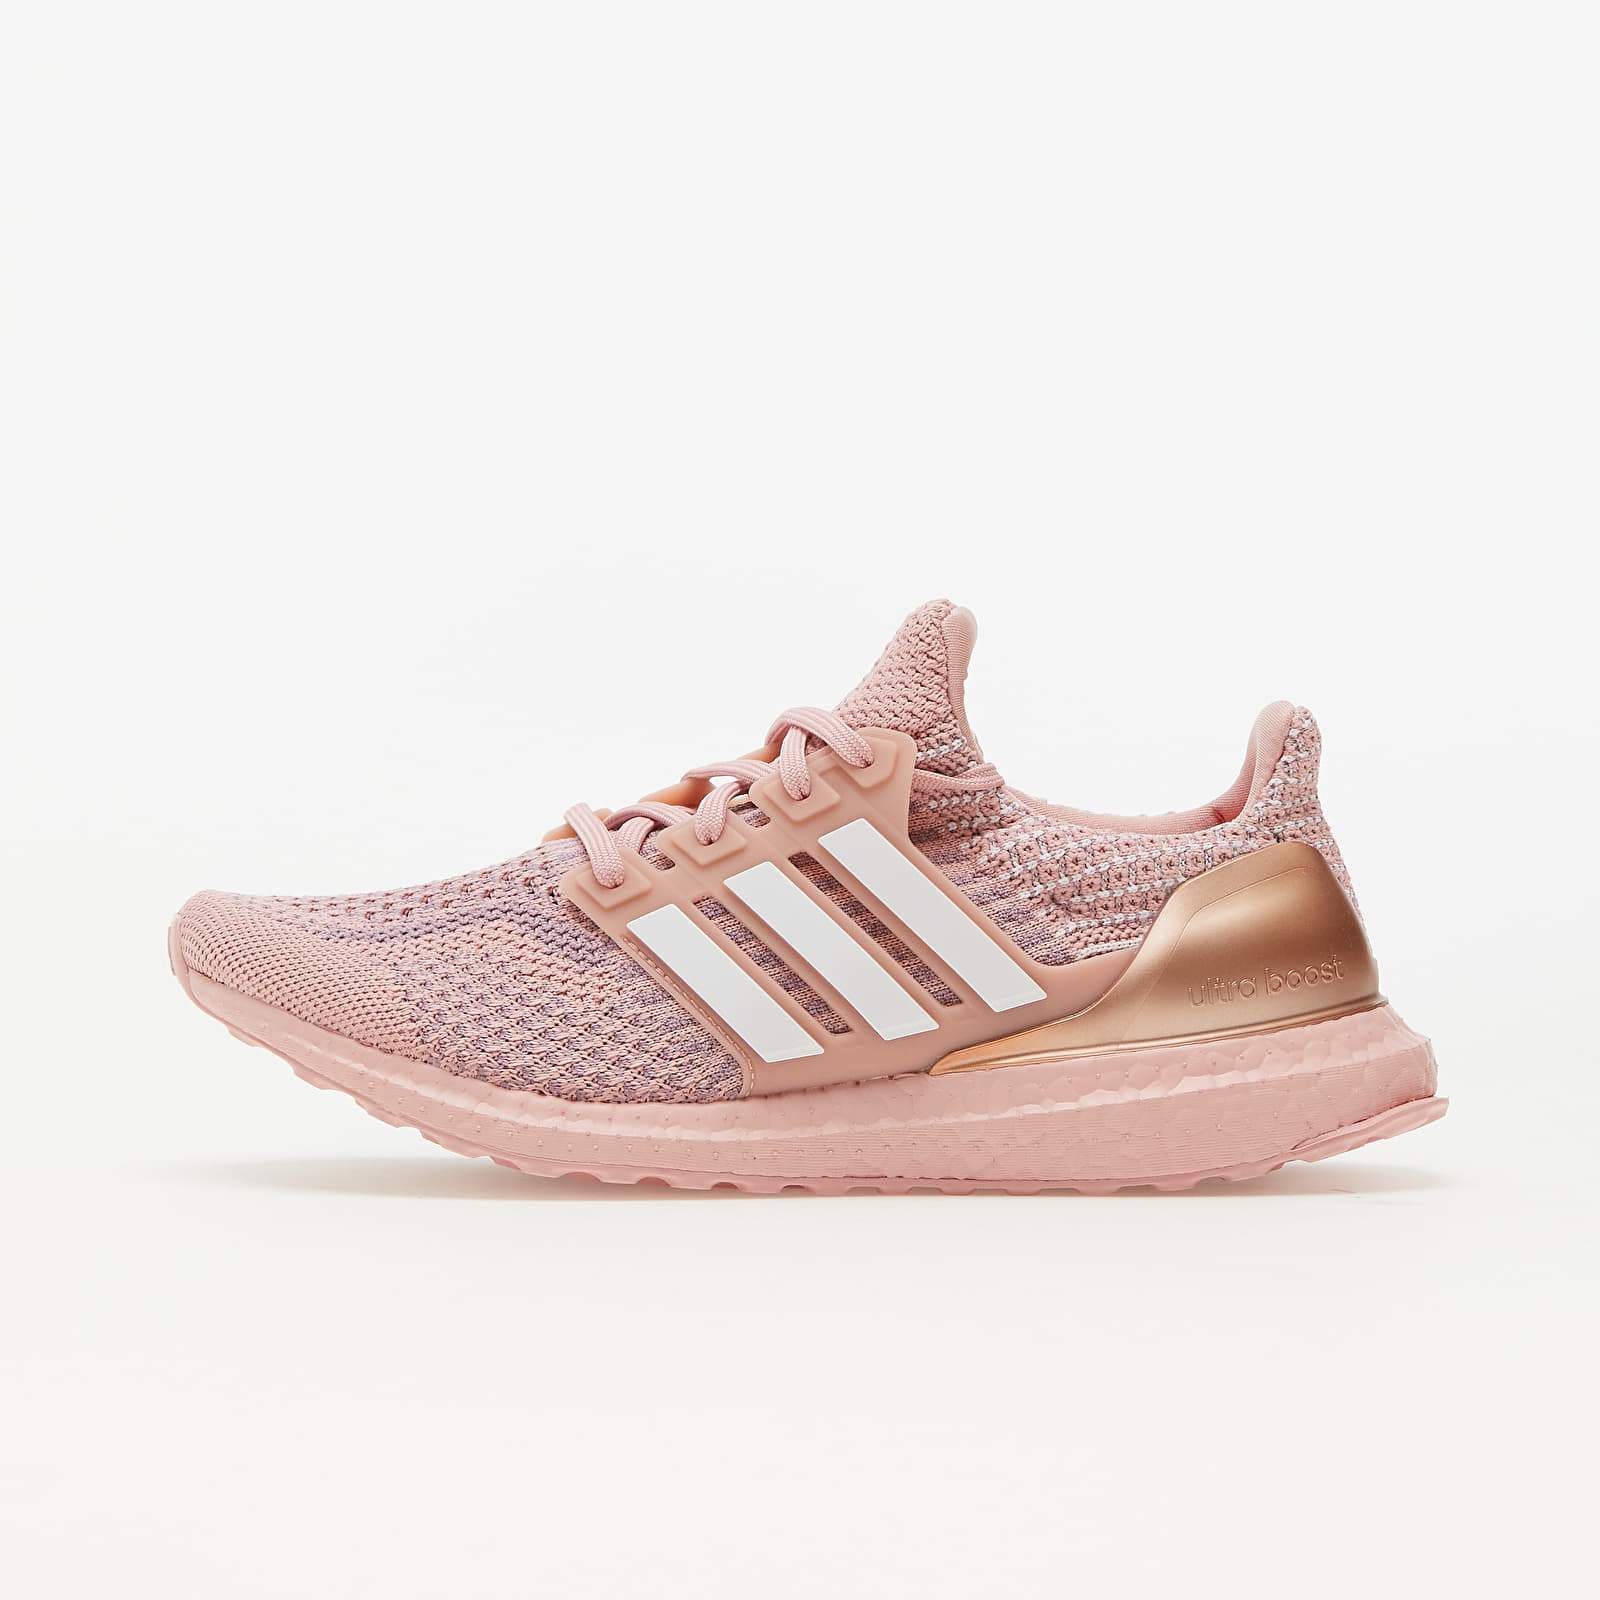 Women's shoes adidas UltraBOOST 5.0 DNA Worn Mauve/ Ftw White/ Acid Red